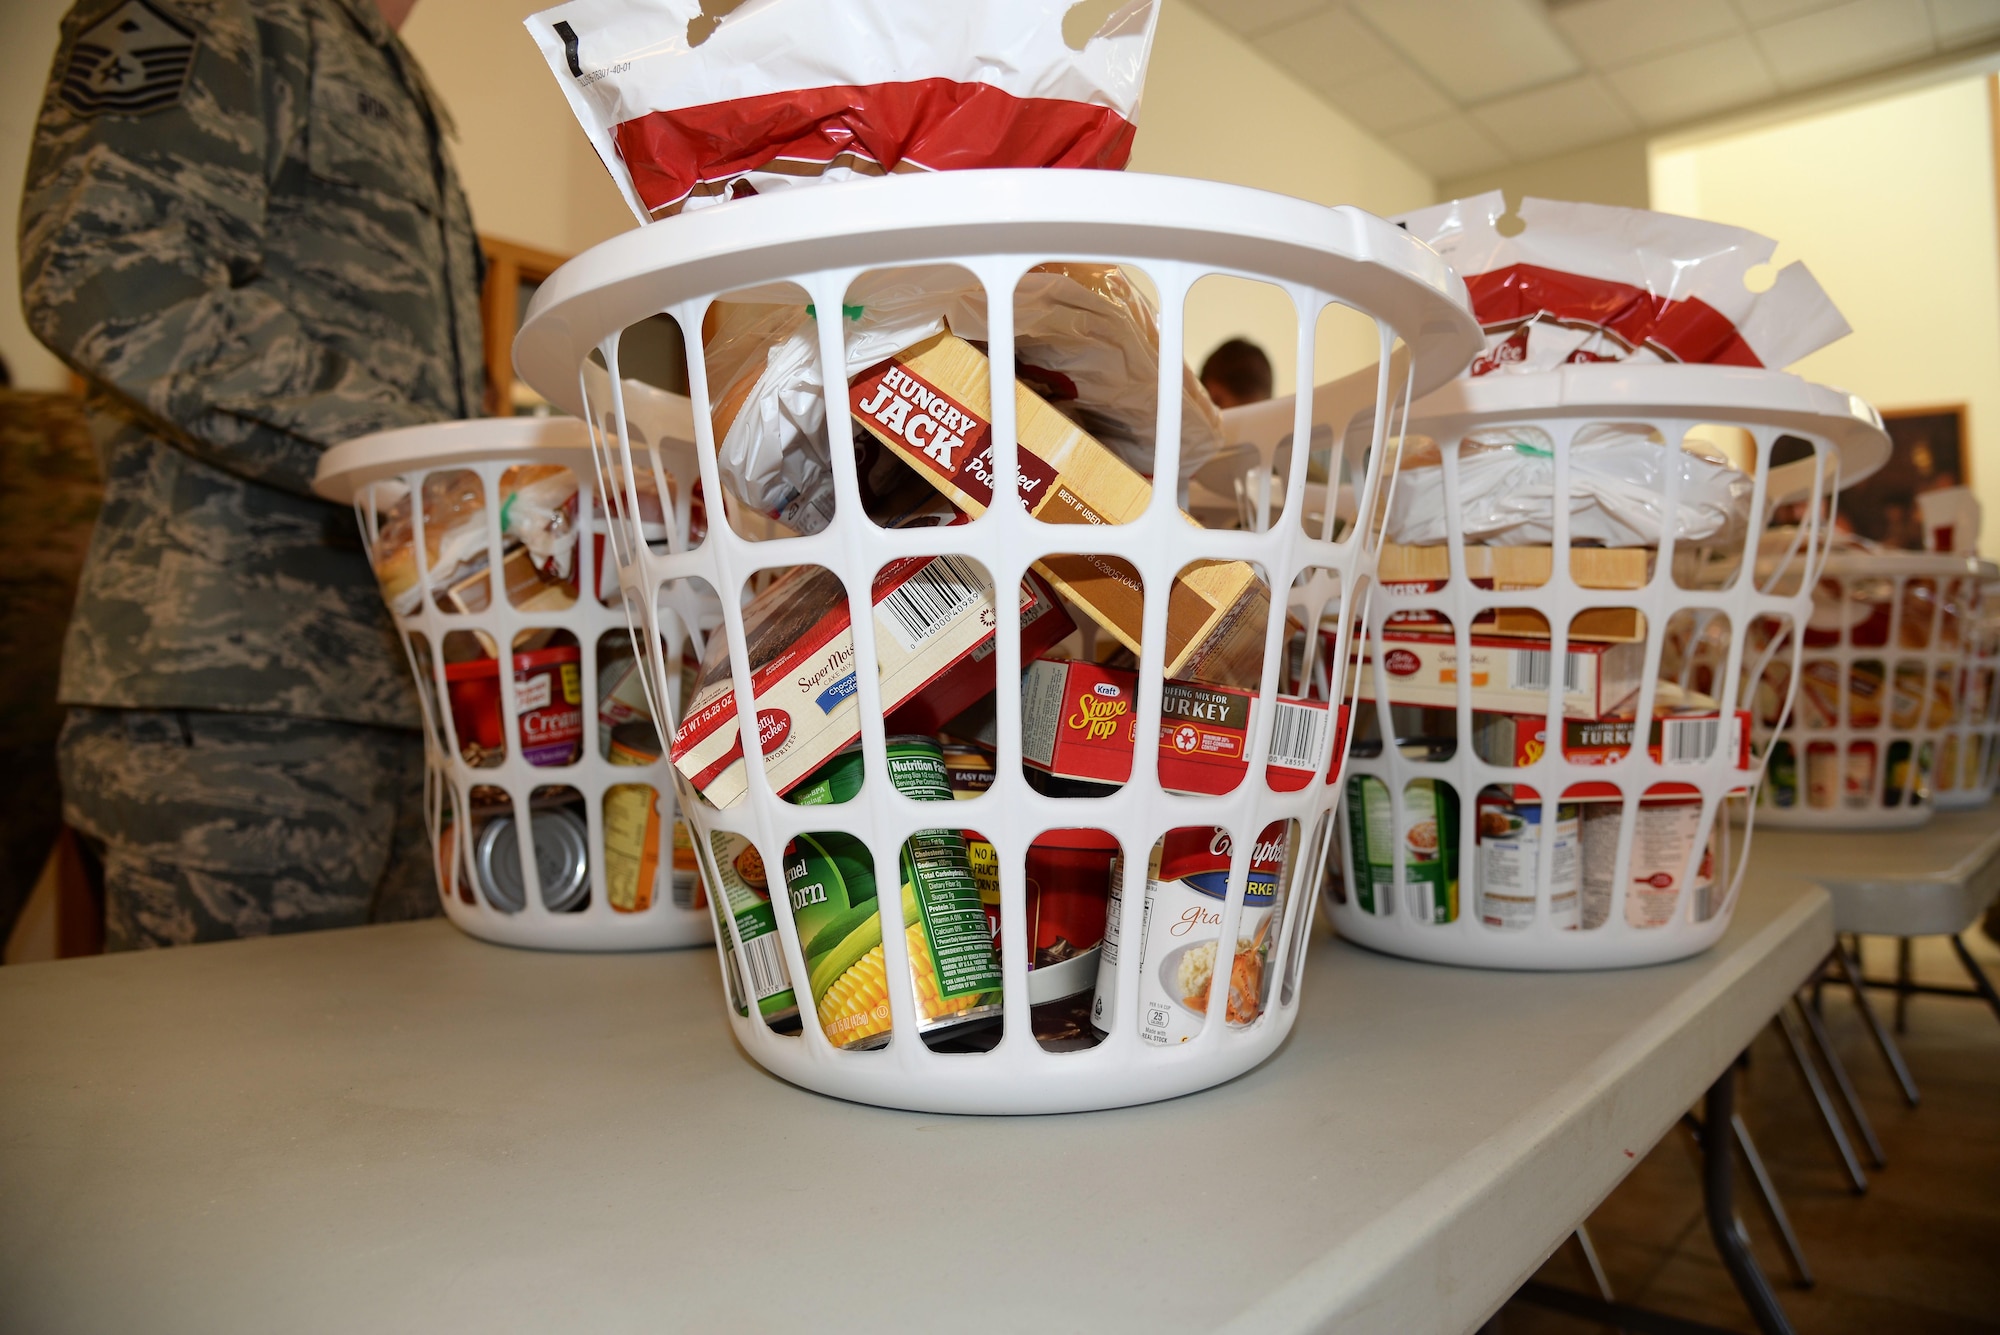 Thanksgiving baskets, put together by the first sergeants council and volunteers, pile up in the High Plains chapel at F.E. Warren Air Force Base, Wyo., Nov. 18, 2016.  125 baskets hold the makings of a great Thanksgiving meal and are funded through community members and the Combined Federal Campaign charity (code 19015). The first sergeants have been able to donate to Airmen for more than six years. The baskets will be delivered to junior-ranking Airmen, selected by their chain of command, to ensure their families are able to enjoy a Thanksgiving meal for the holiday. (U.S. Photo by 2d Lt. Nikita Thorpe)